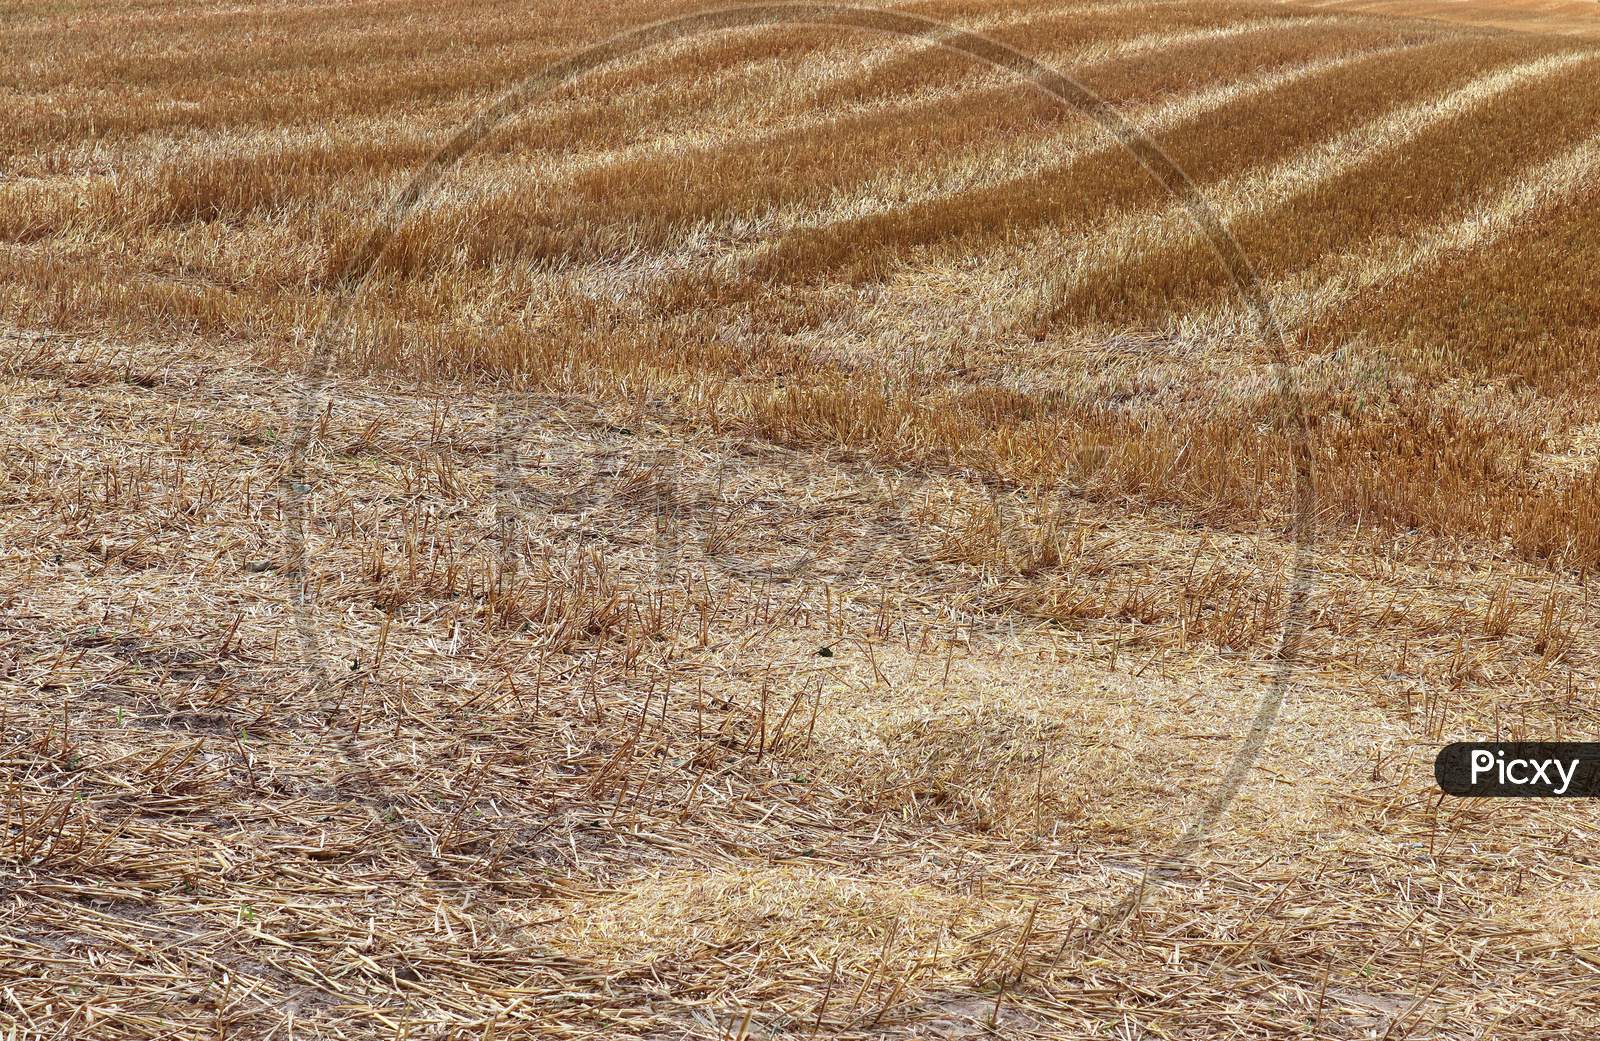 Detailed close up view on agricultural fields with wheat and crop plants ready for harvesting